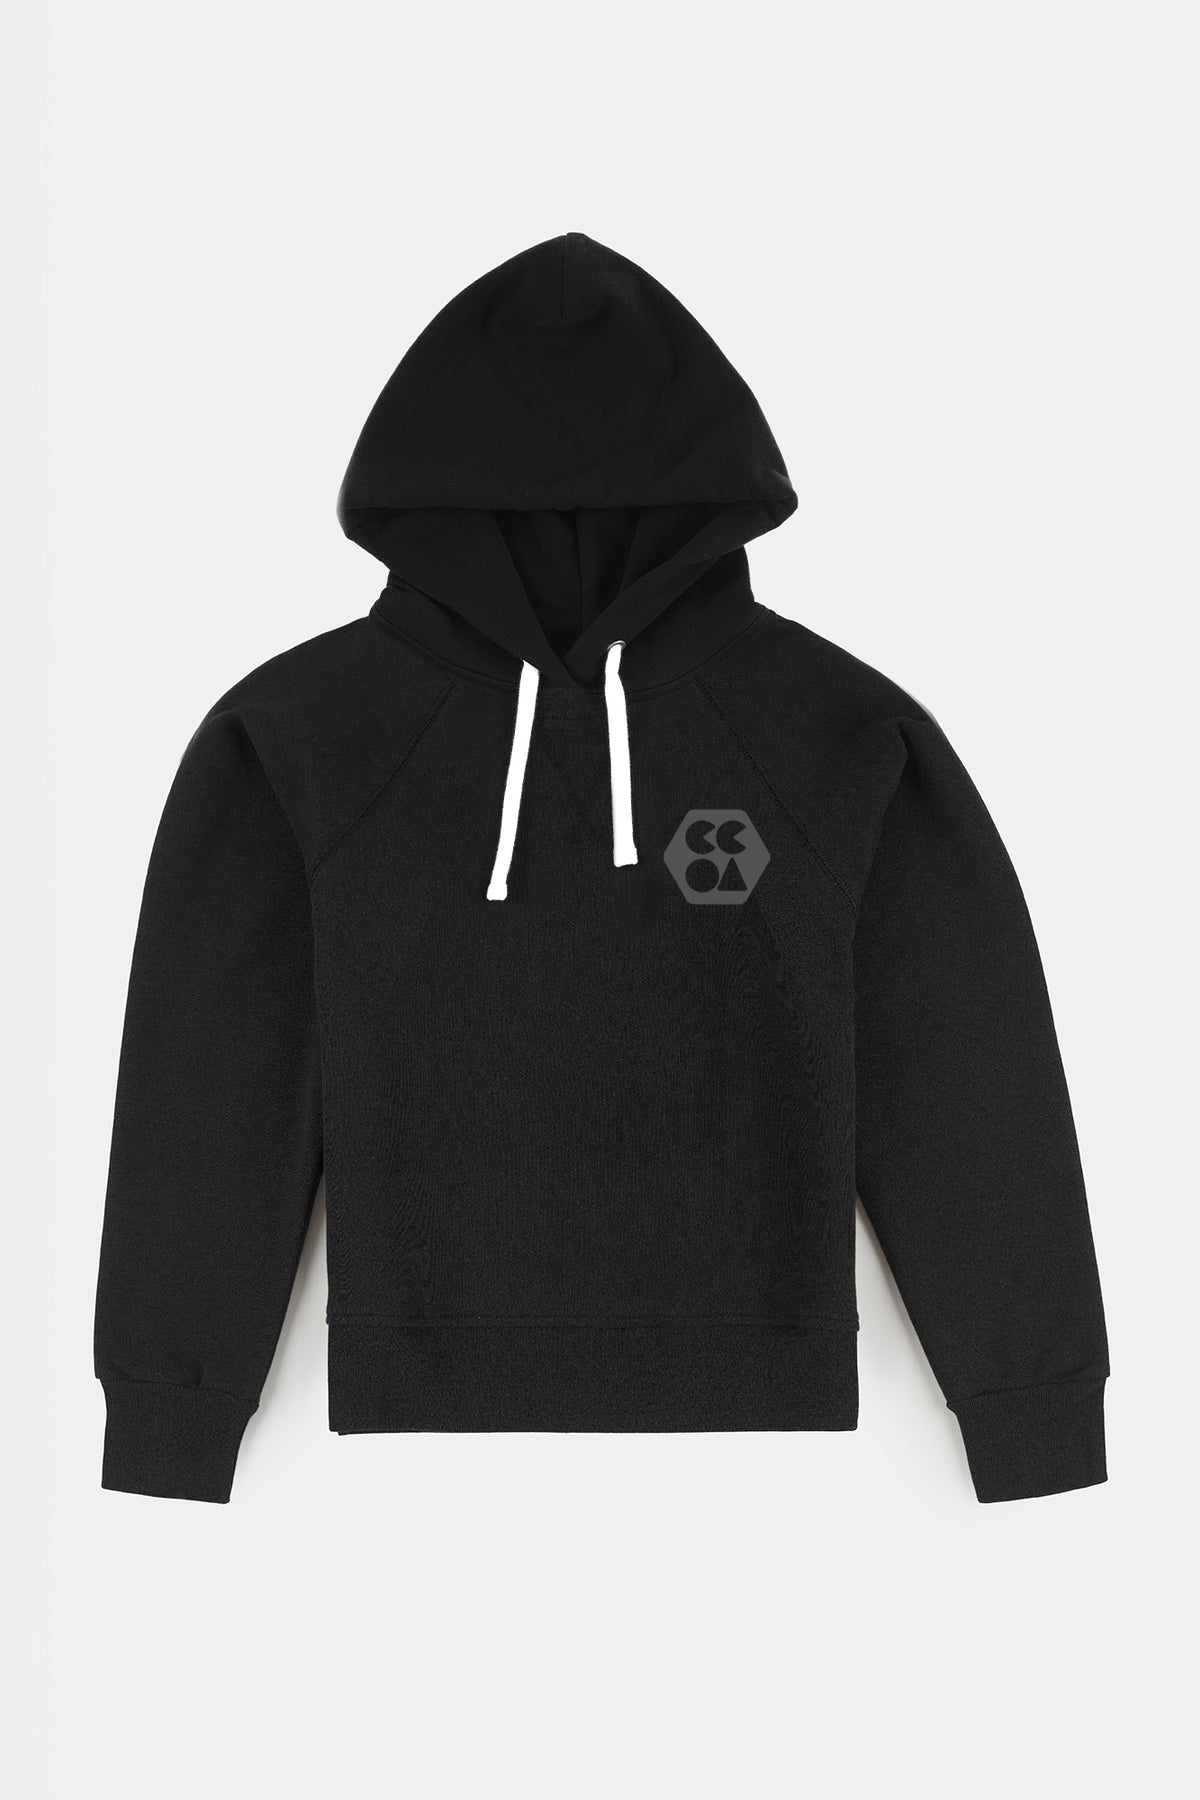 
            Flatlay product shot of male wearing hooded raglan sweatshirt in black with CCOA logo on the chest